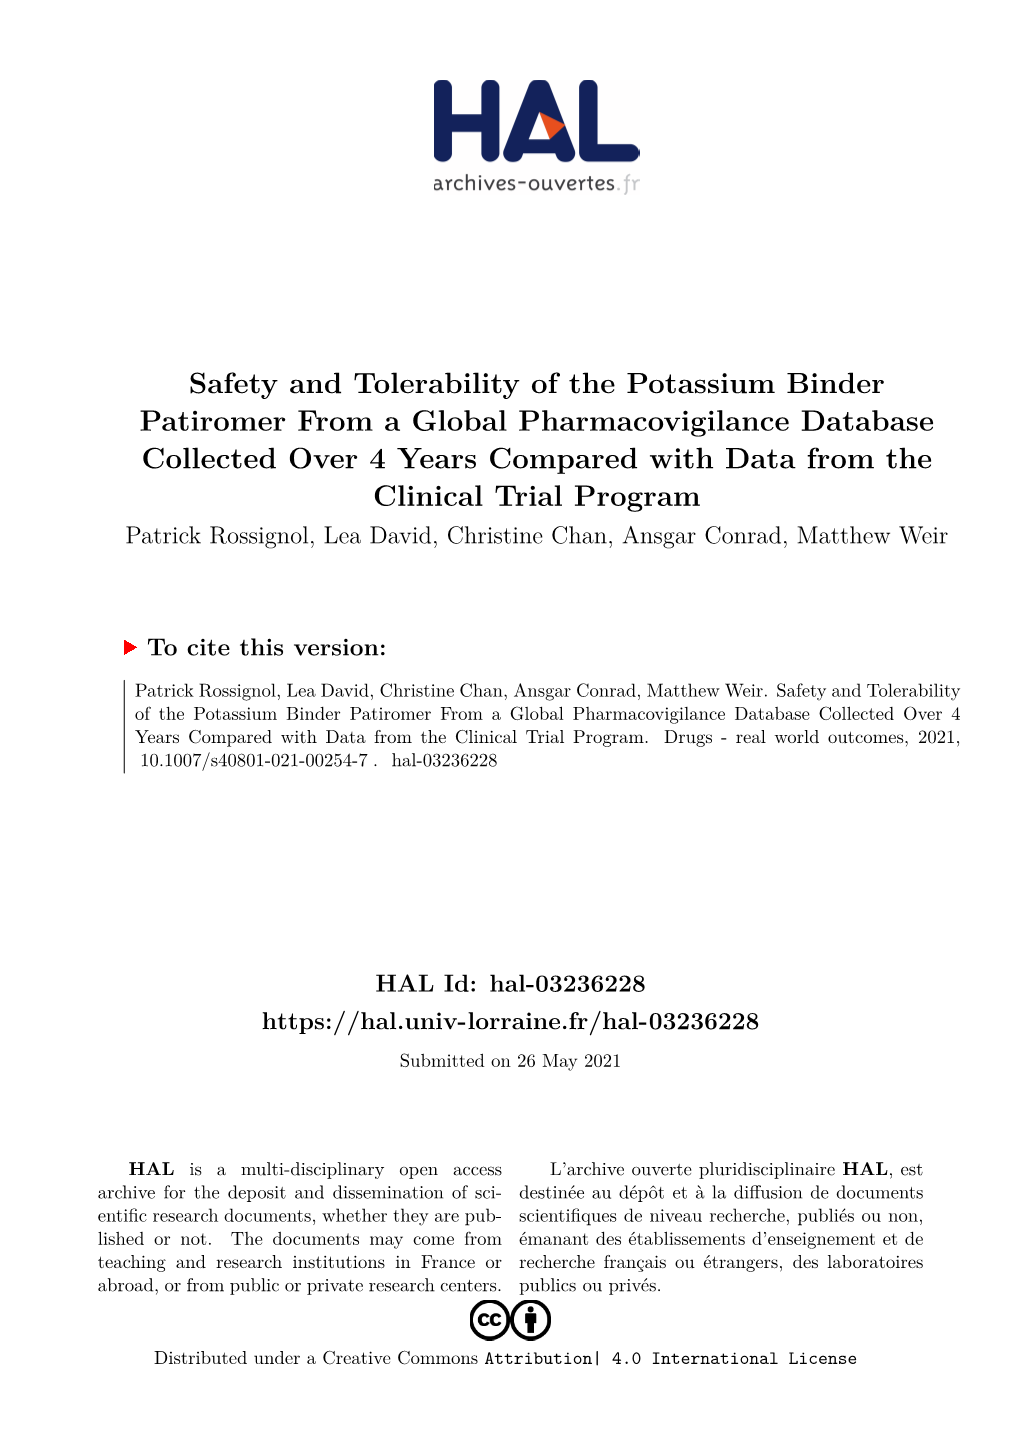 Safety and Tolerability of the Potassium Binder Patiromer from a Global Pharmacovigilance Database Collected Over 4 Years Compar